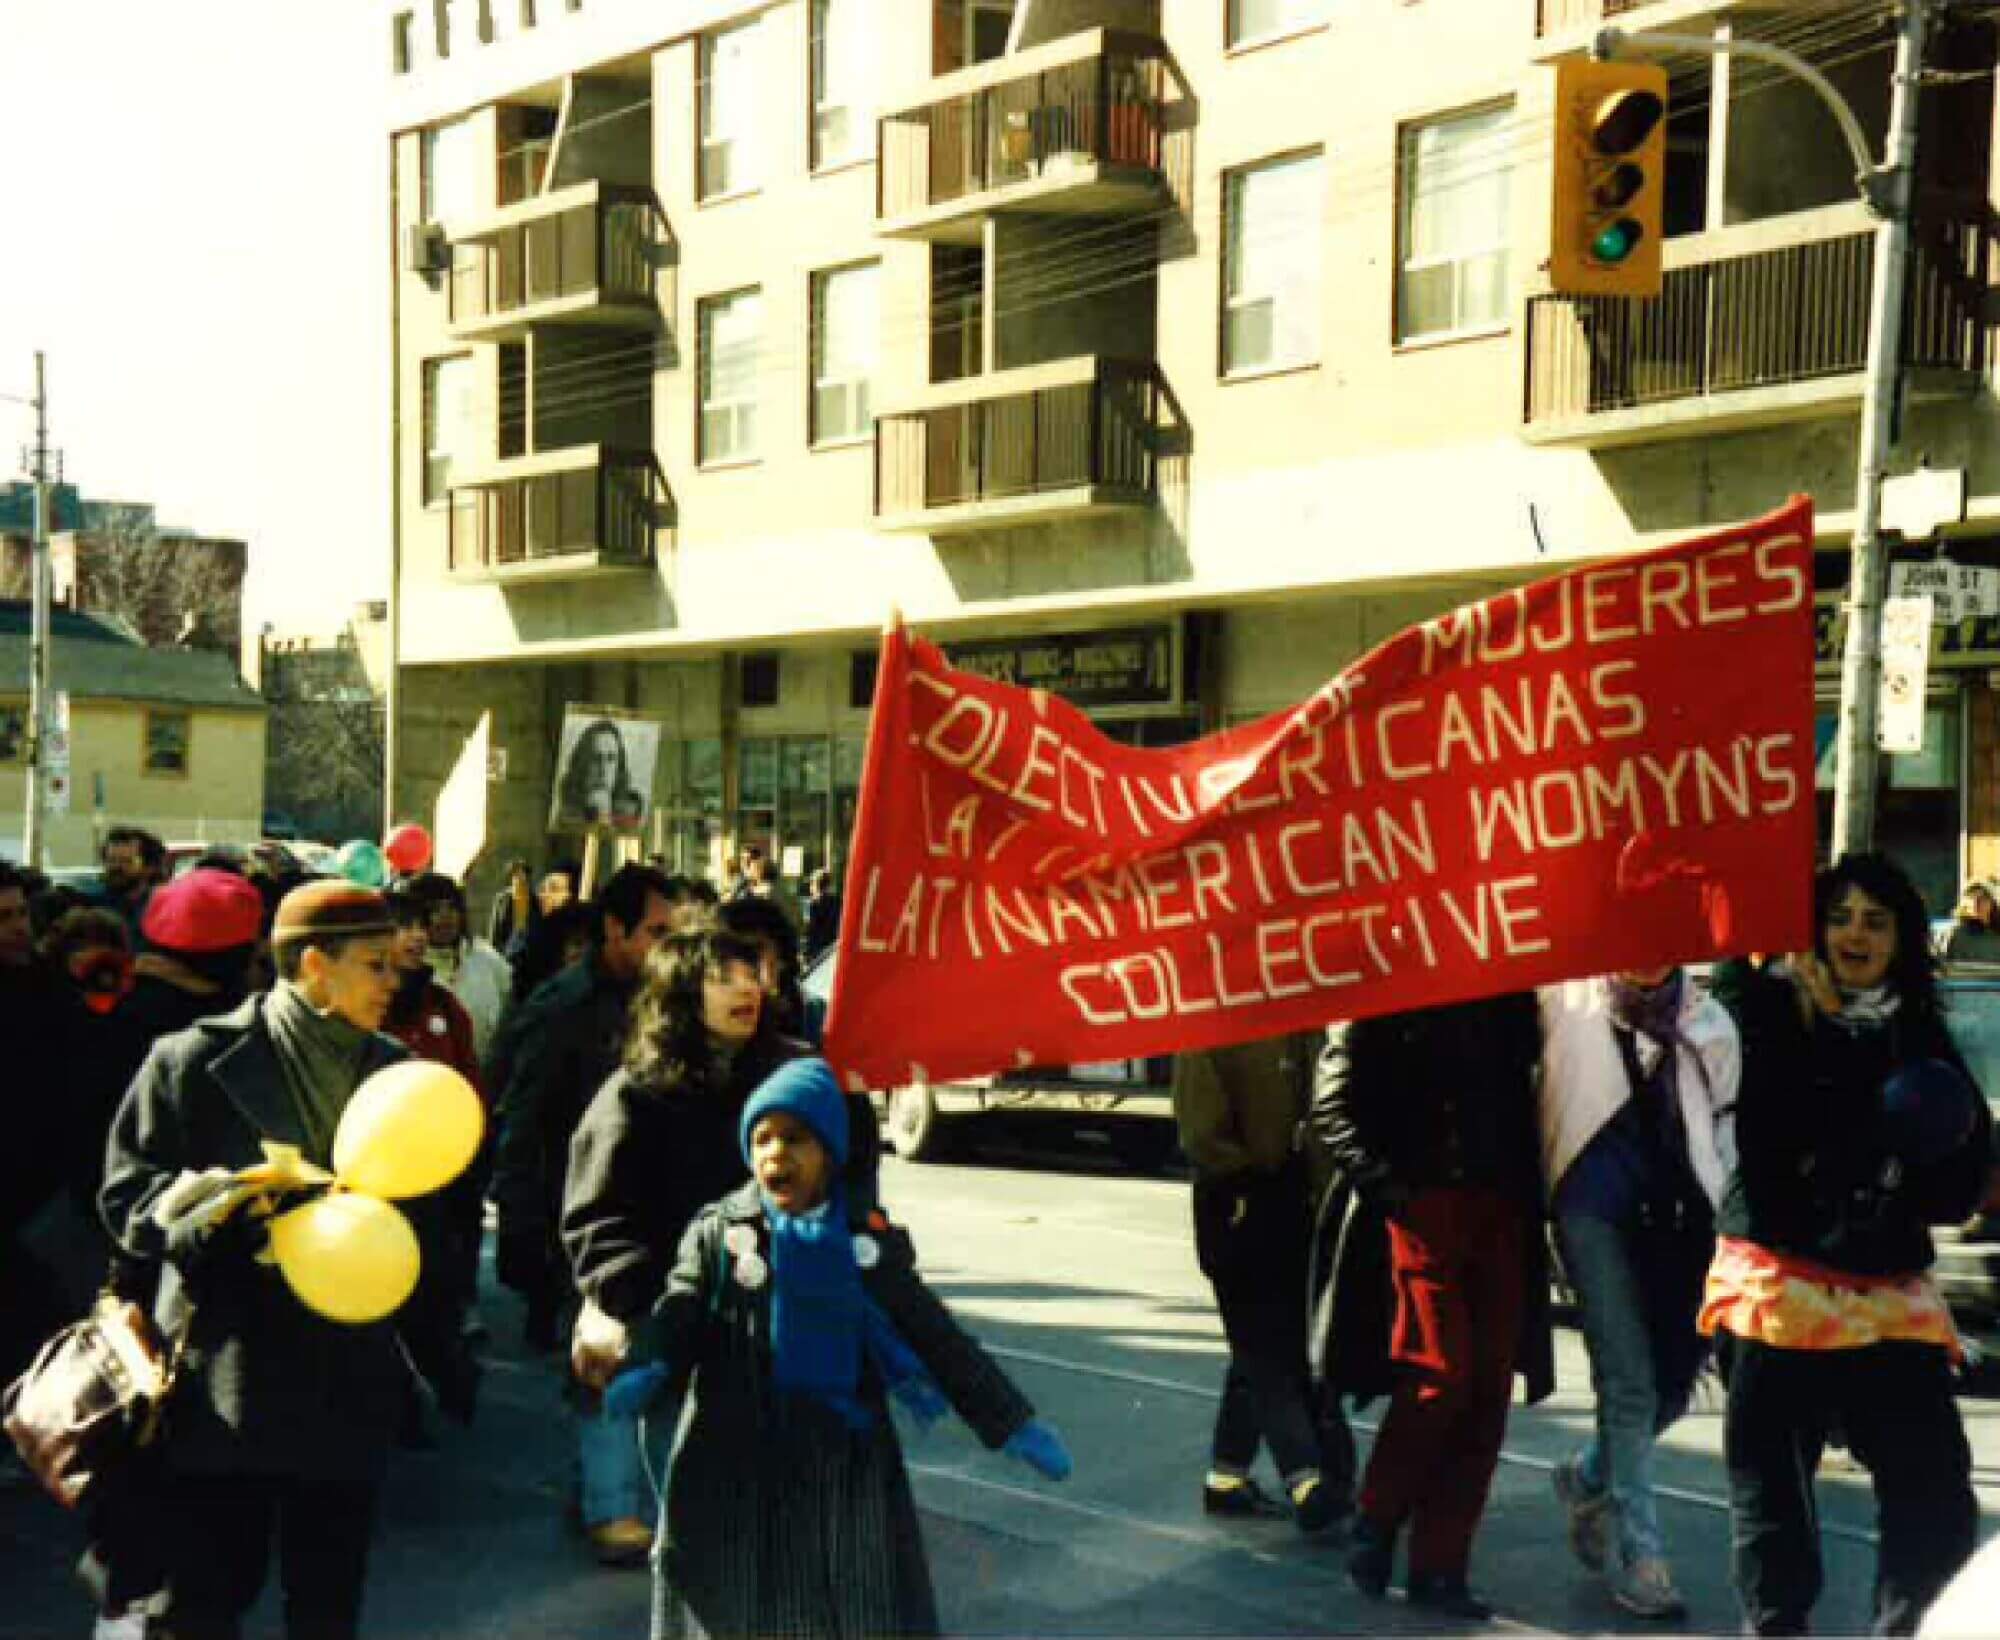 A group of women march on a city street in daylight. Two of them are holding a red banner with white lettering. The top of the banner is crumpled and much of the text is obscured. The word mujeres can be seen at the top, at the bottom the words Latin American Womyn's Collective can be seen. Above the group is single traffic light hanging from a street pole. Behind the group is the bottom half of a tall, beige apartment building.